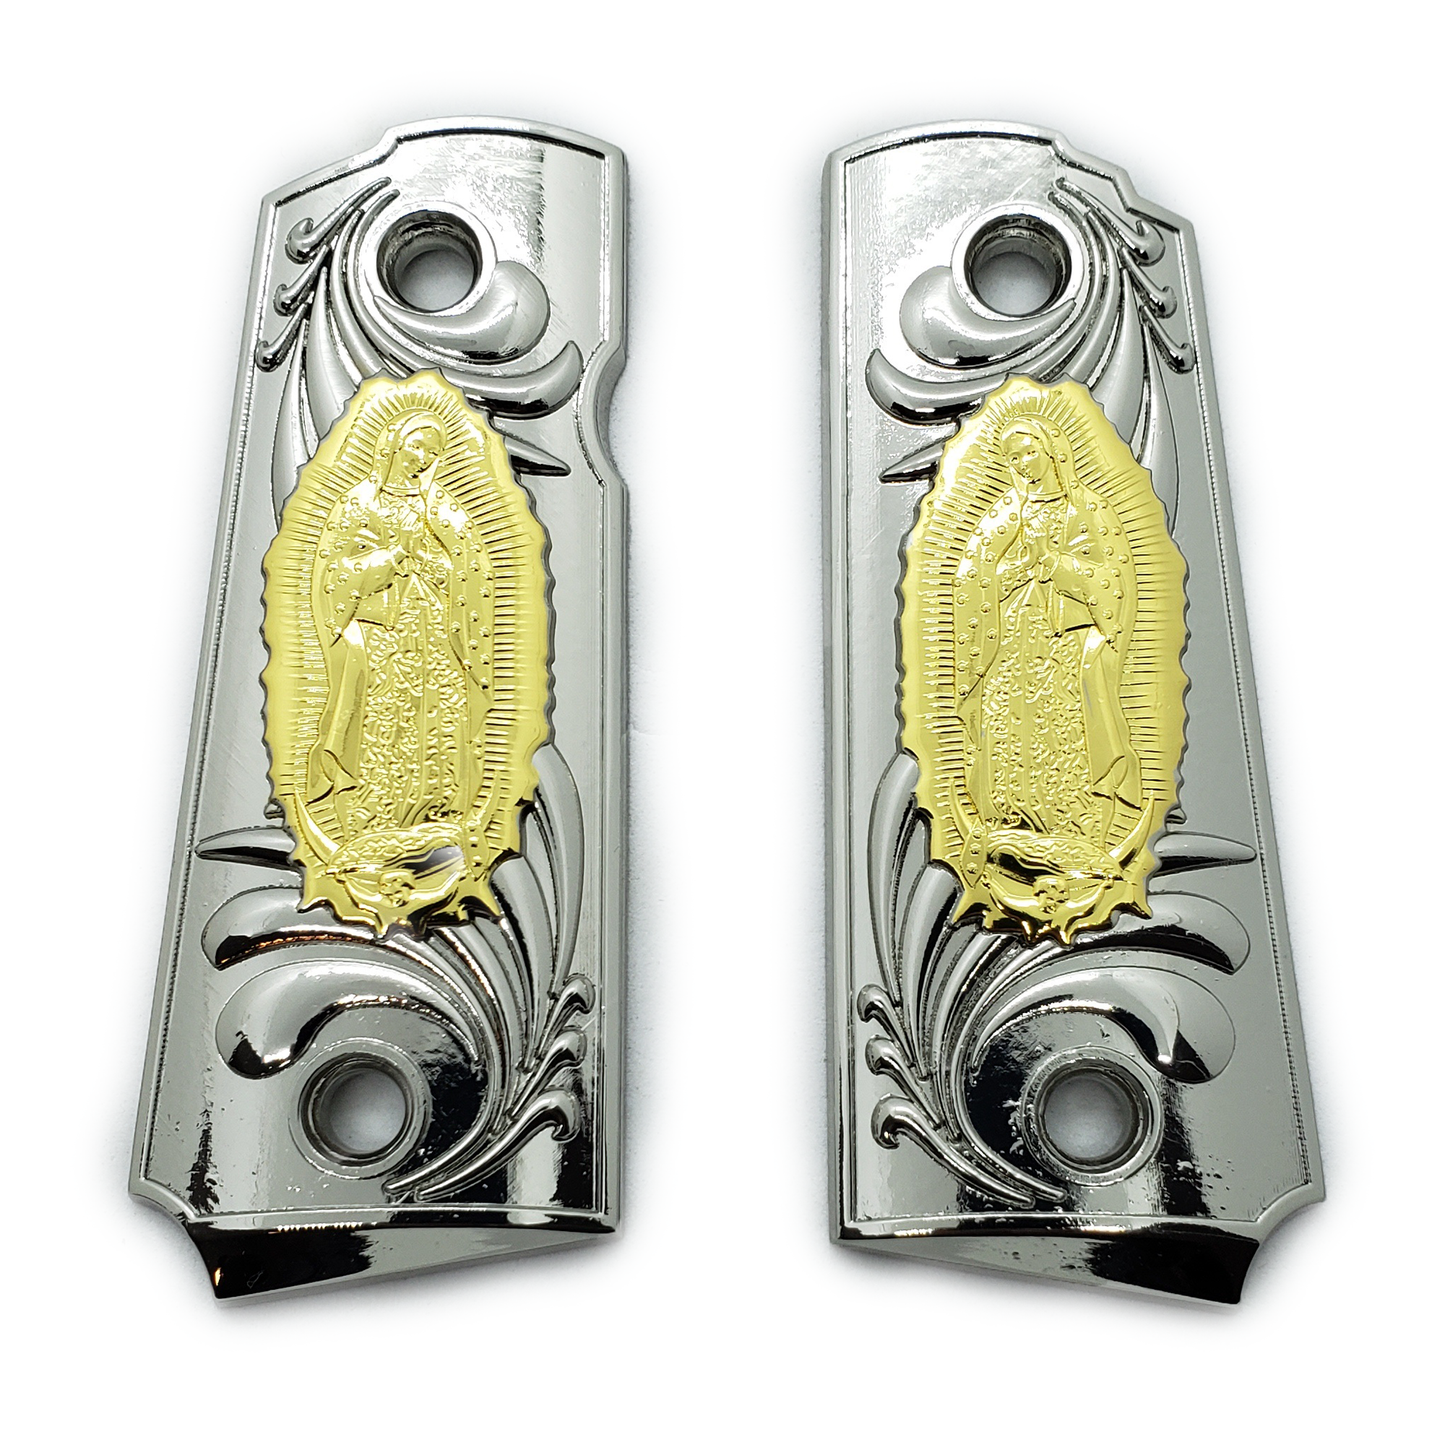 1911 Grips Compact Officer Size  Virgin Mary Gold Nickel